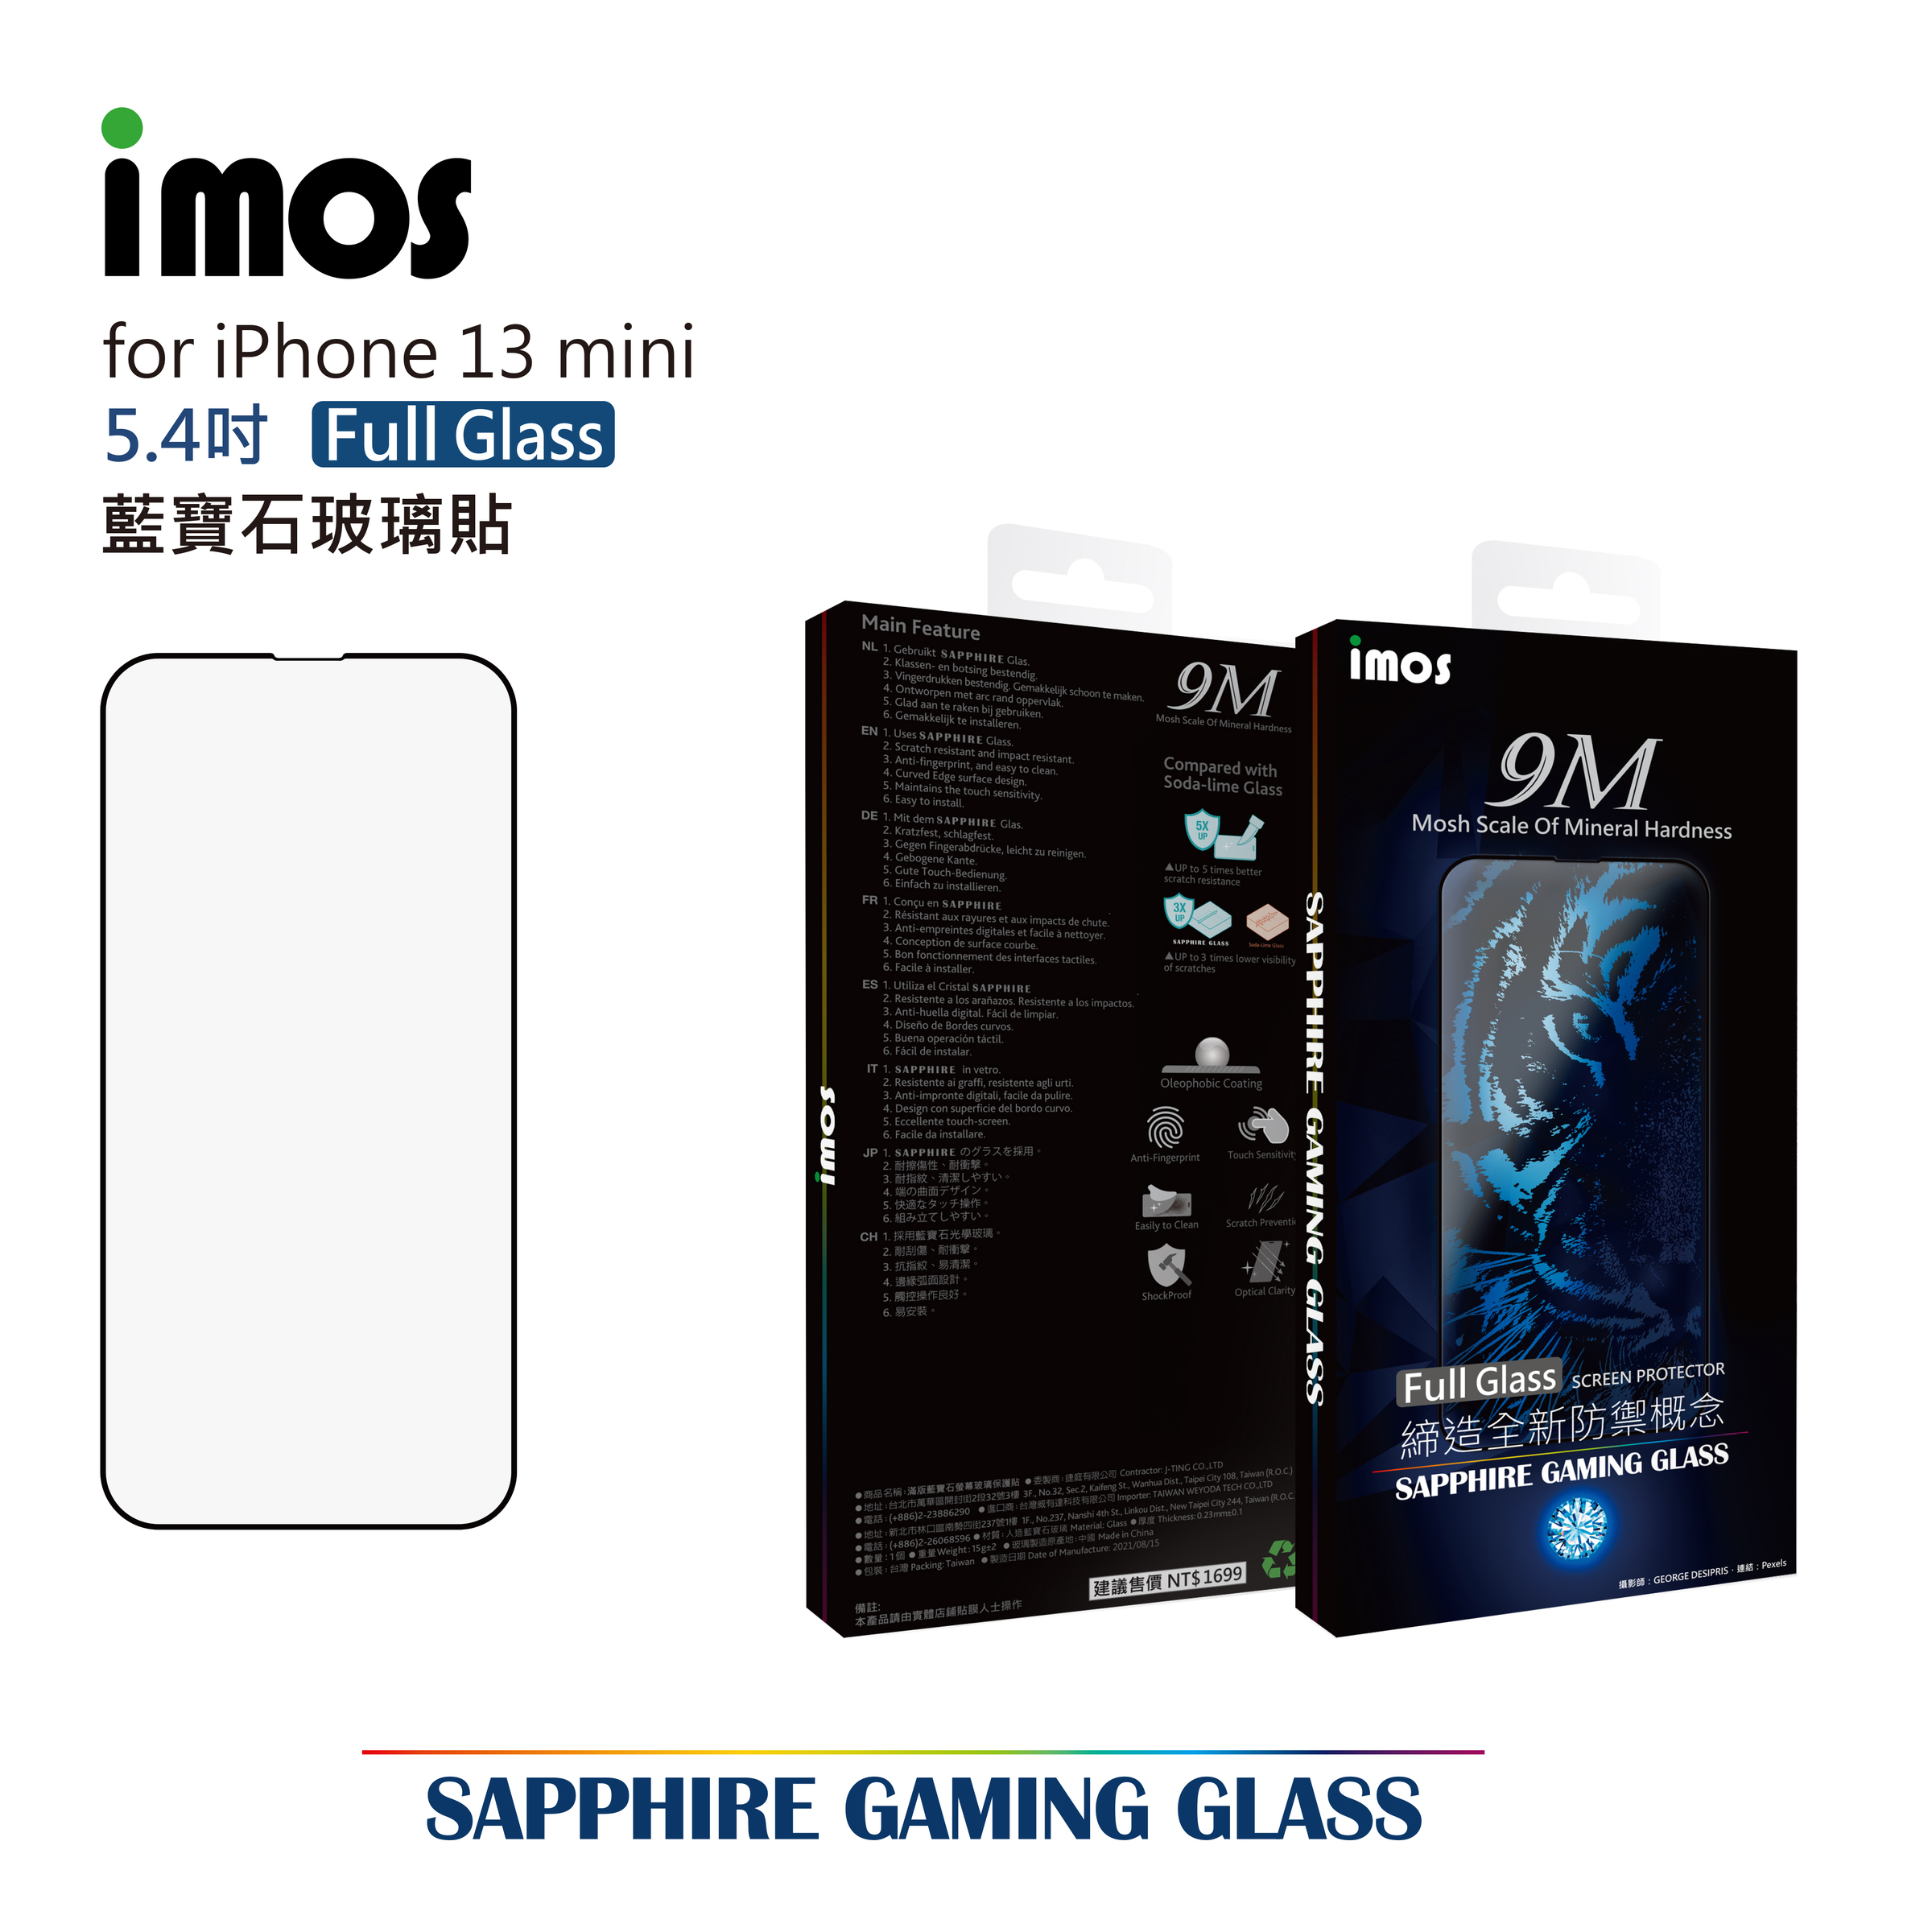 Imos Sapphire Glass Screen Protector for iPhone 13 Mini 5.4" – Eoh & Flo